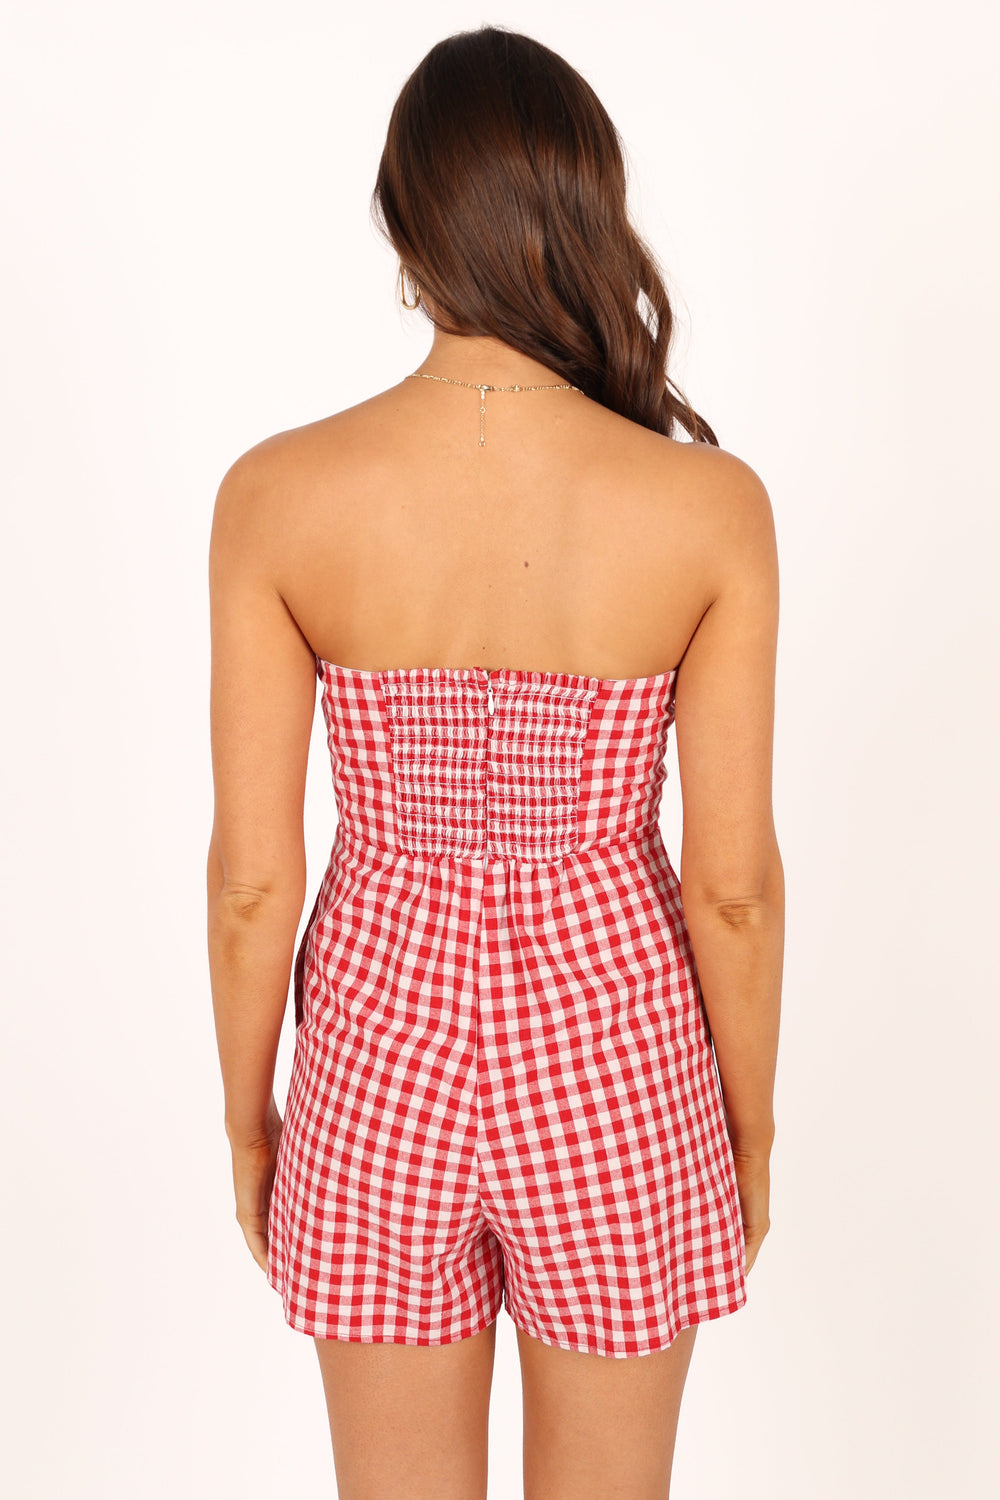 PLAYSUITS @Bambi Bow Romper - Red/White